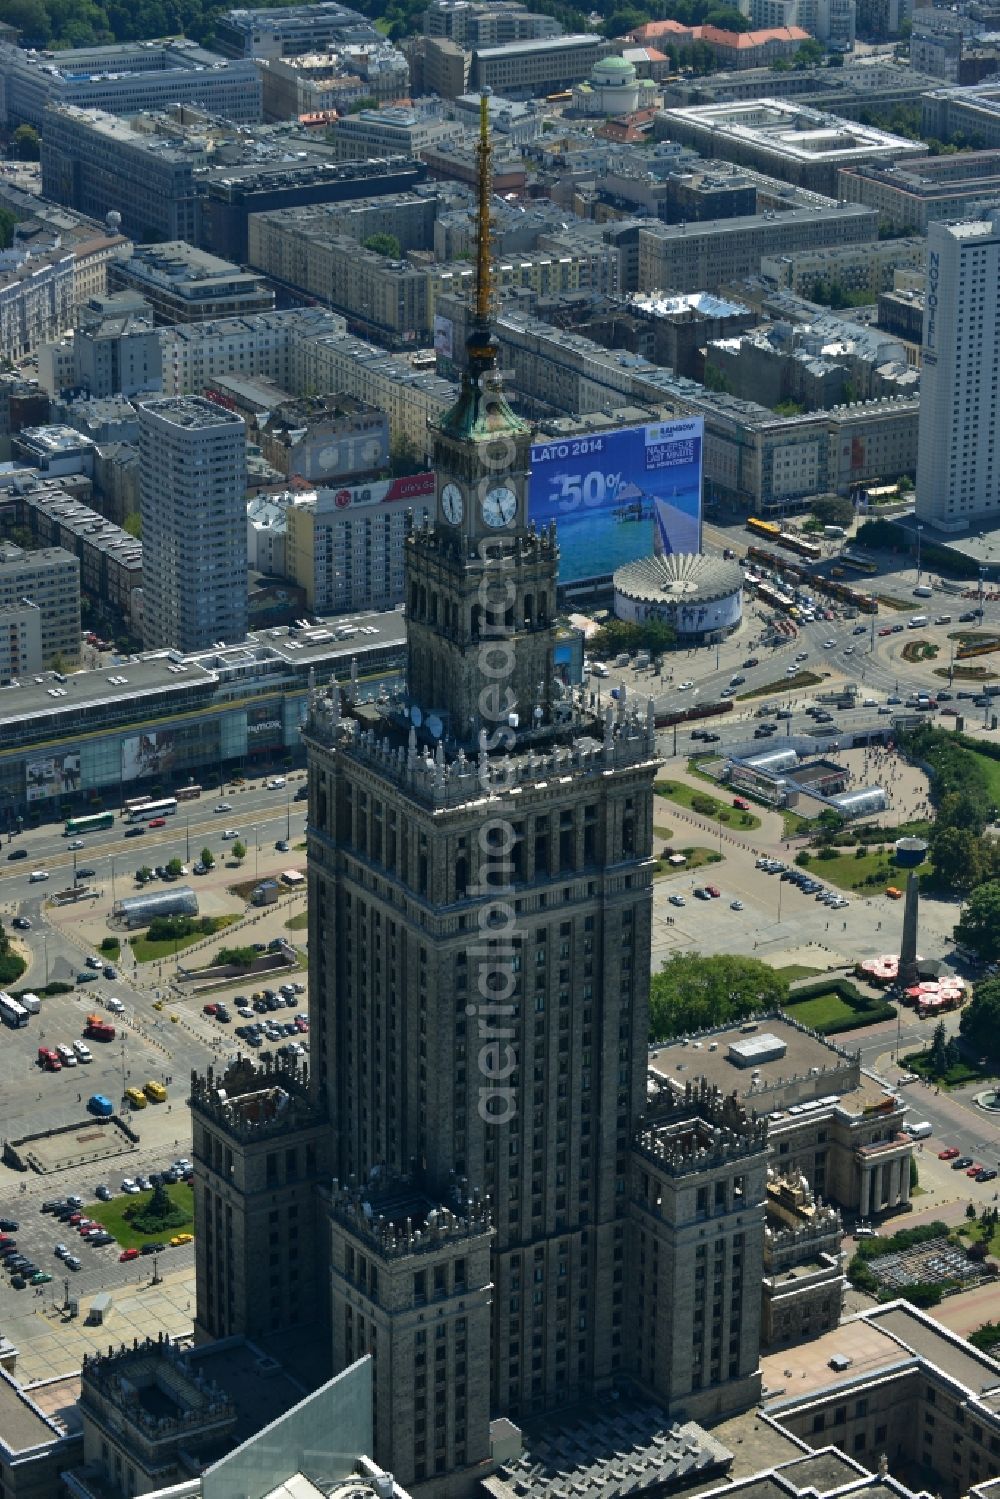 Warschau from above - View on the landmark in the city center, the high-rise building complex of the Palace of Culture and Science (Palac Kultury i Nauki Polish) in Warsaw in Poland